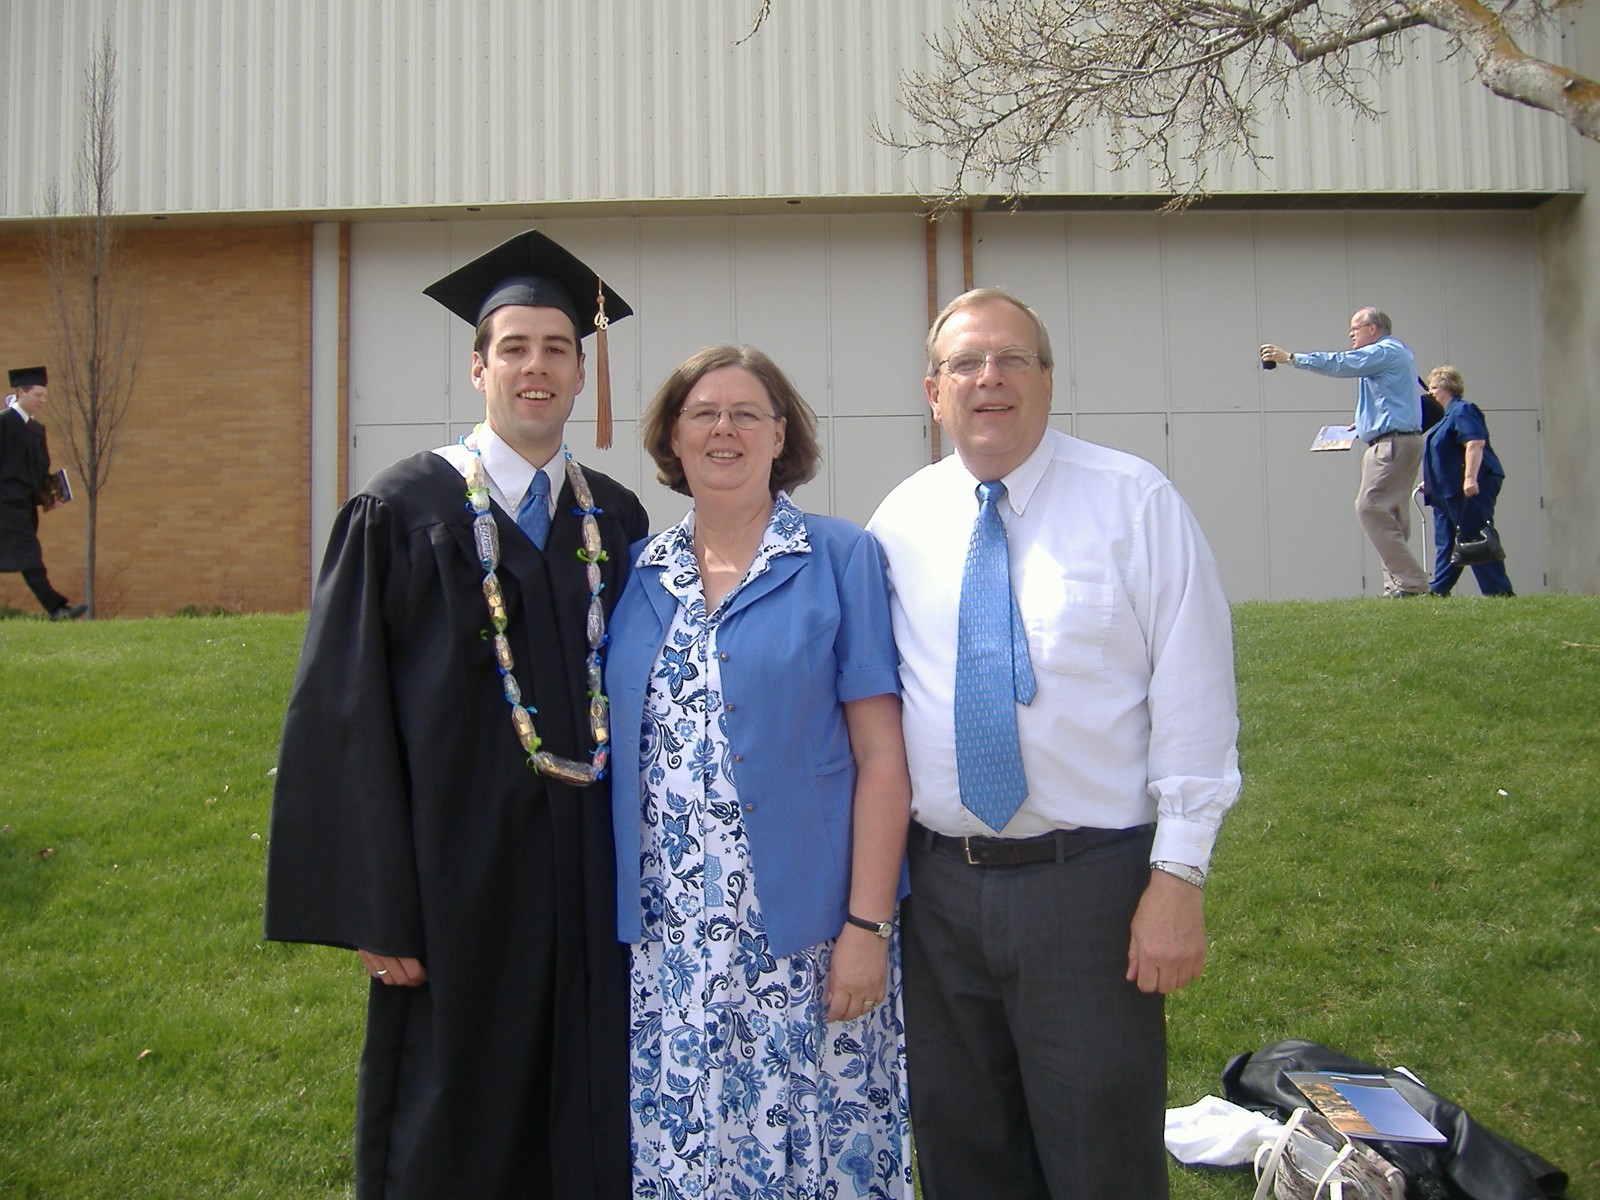 [Darrell+with+parents.JPG]